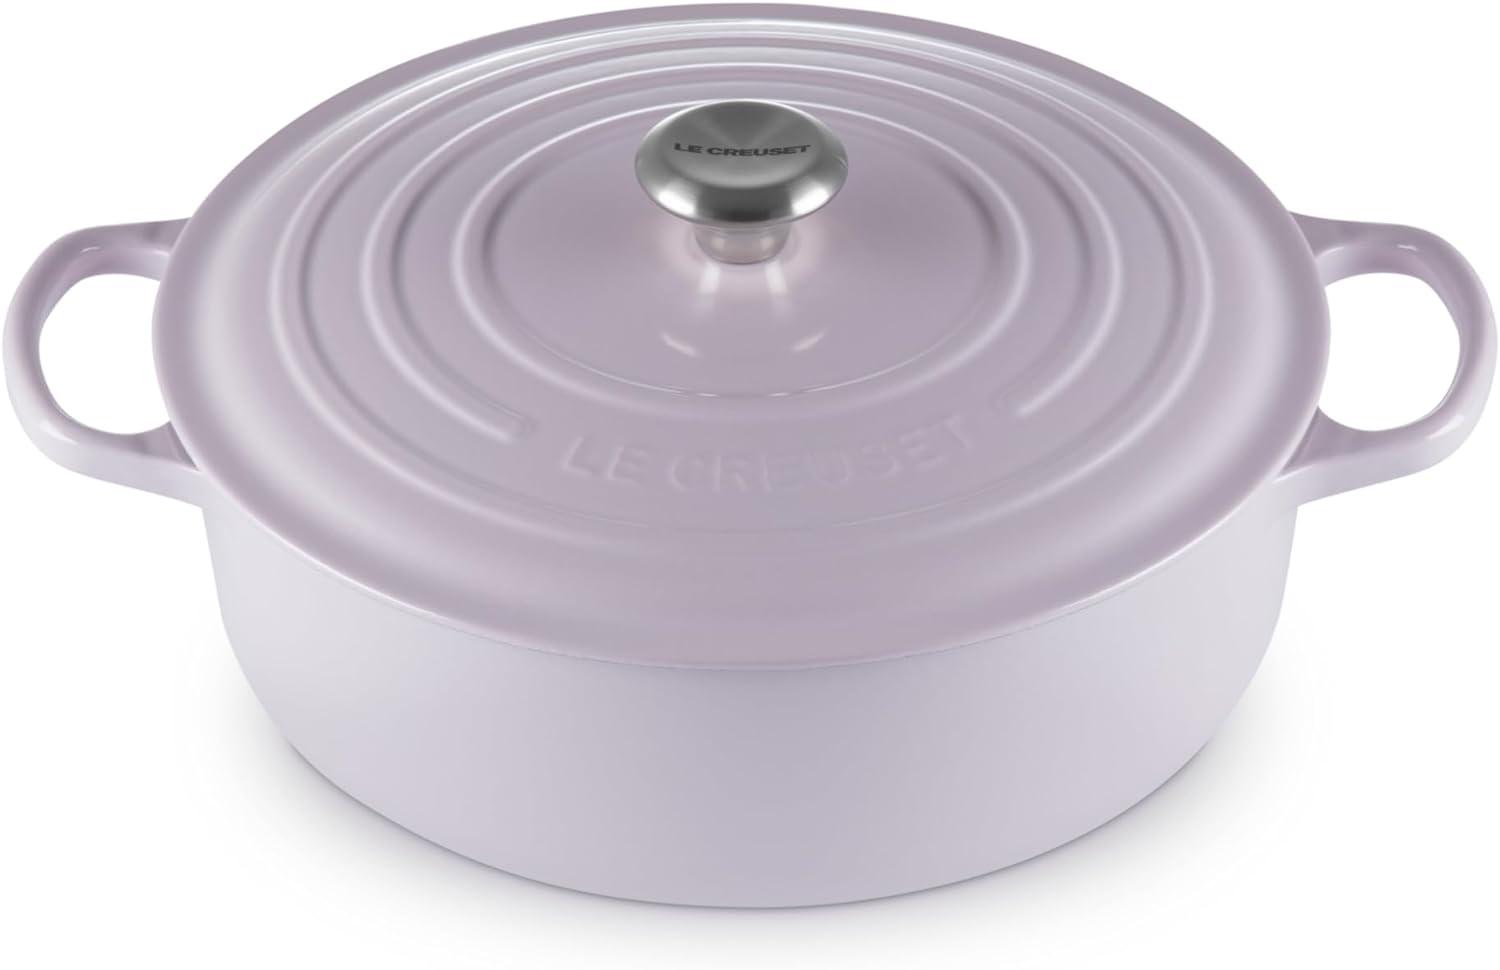 Le Creuset Enameled Cast Iron Signature Round Wide Dutch Oven for $222.72 Shipped